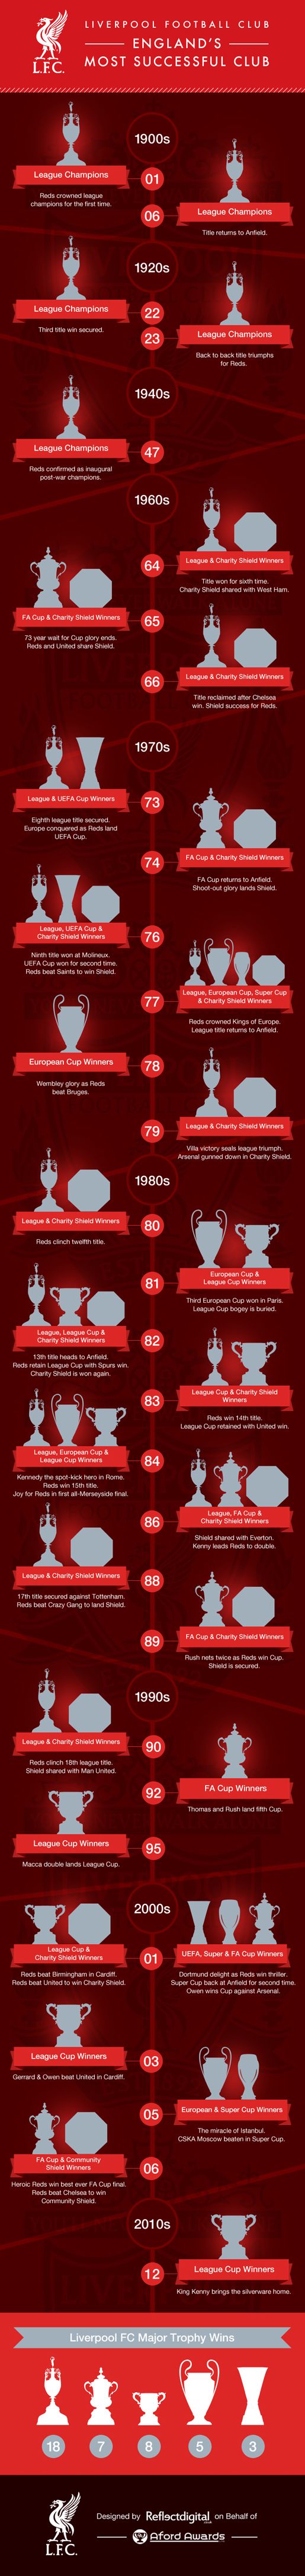 History of Liverpool Football Club Trophies